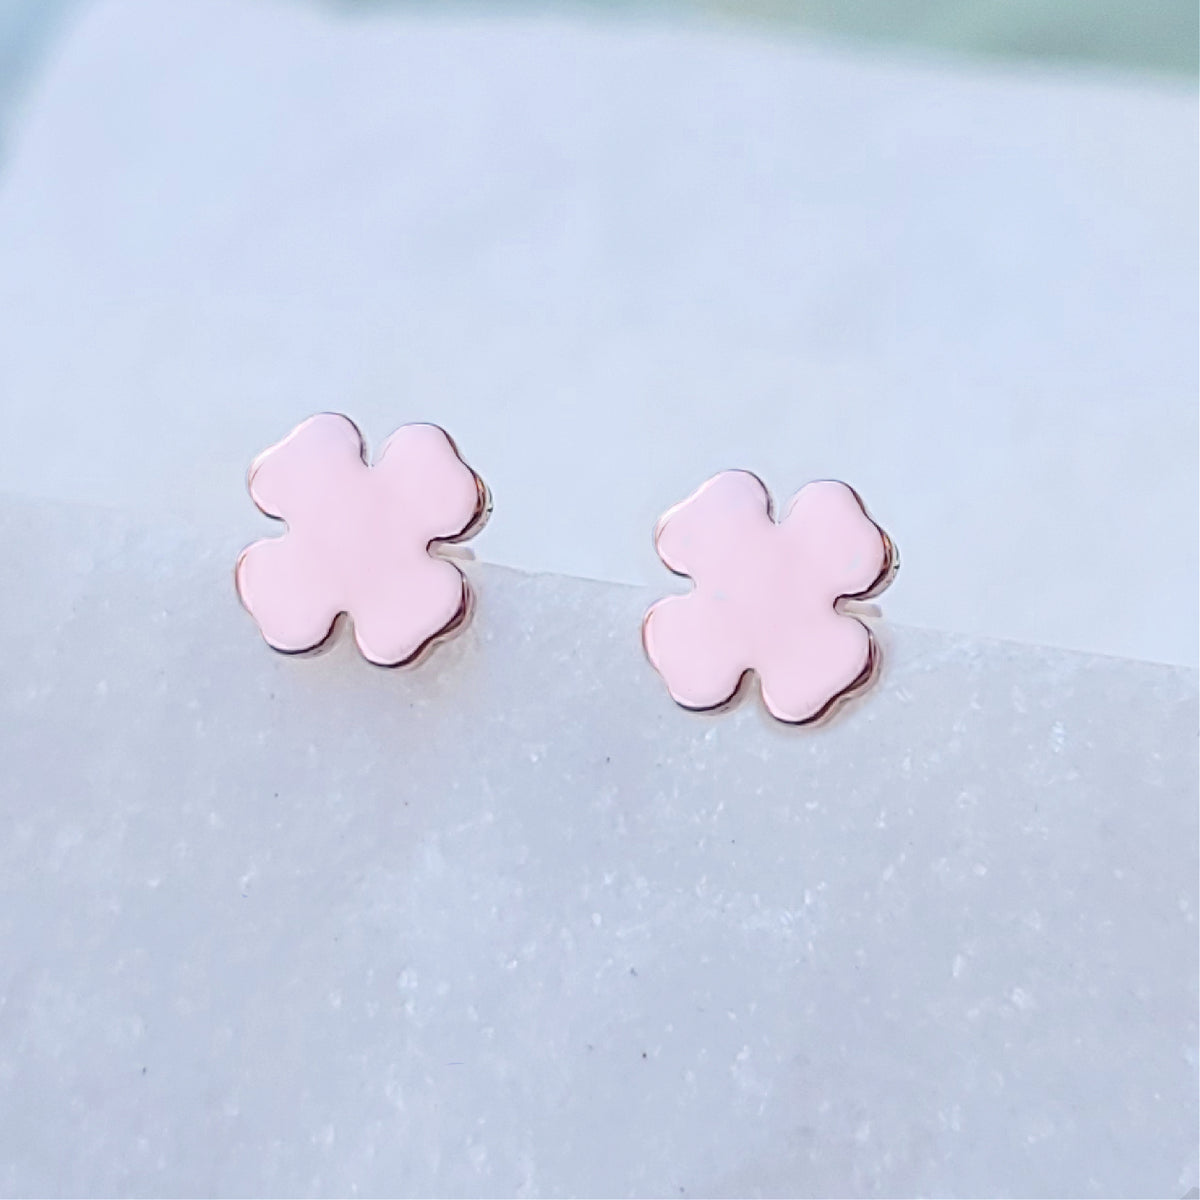 Sincerely Ginger Jewelry 14K Minimalistic Clover Stud Earrings in Rose Gold